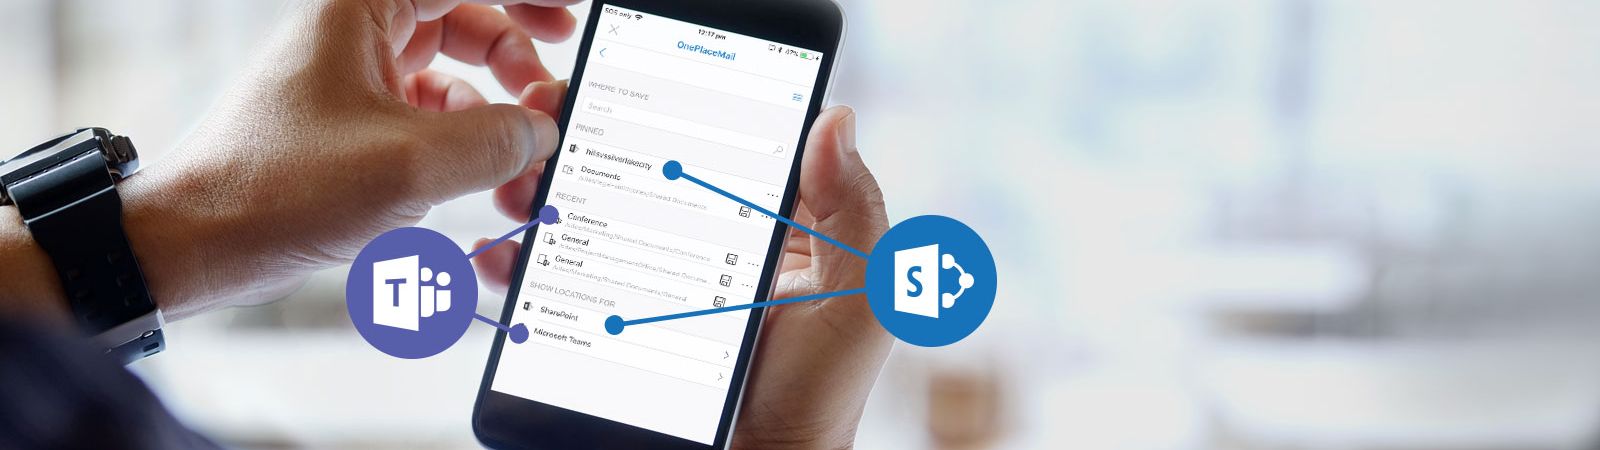 The OnePlace Solutions team are excited to announce the OnePlaceMail App is now in general availability.